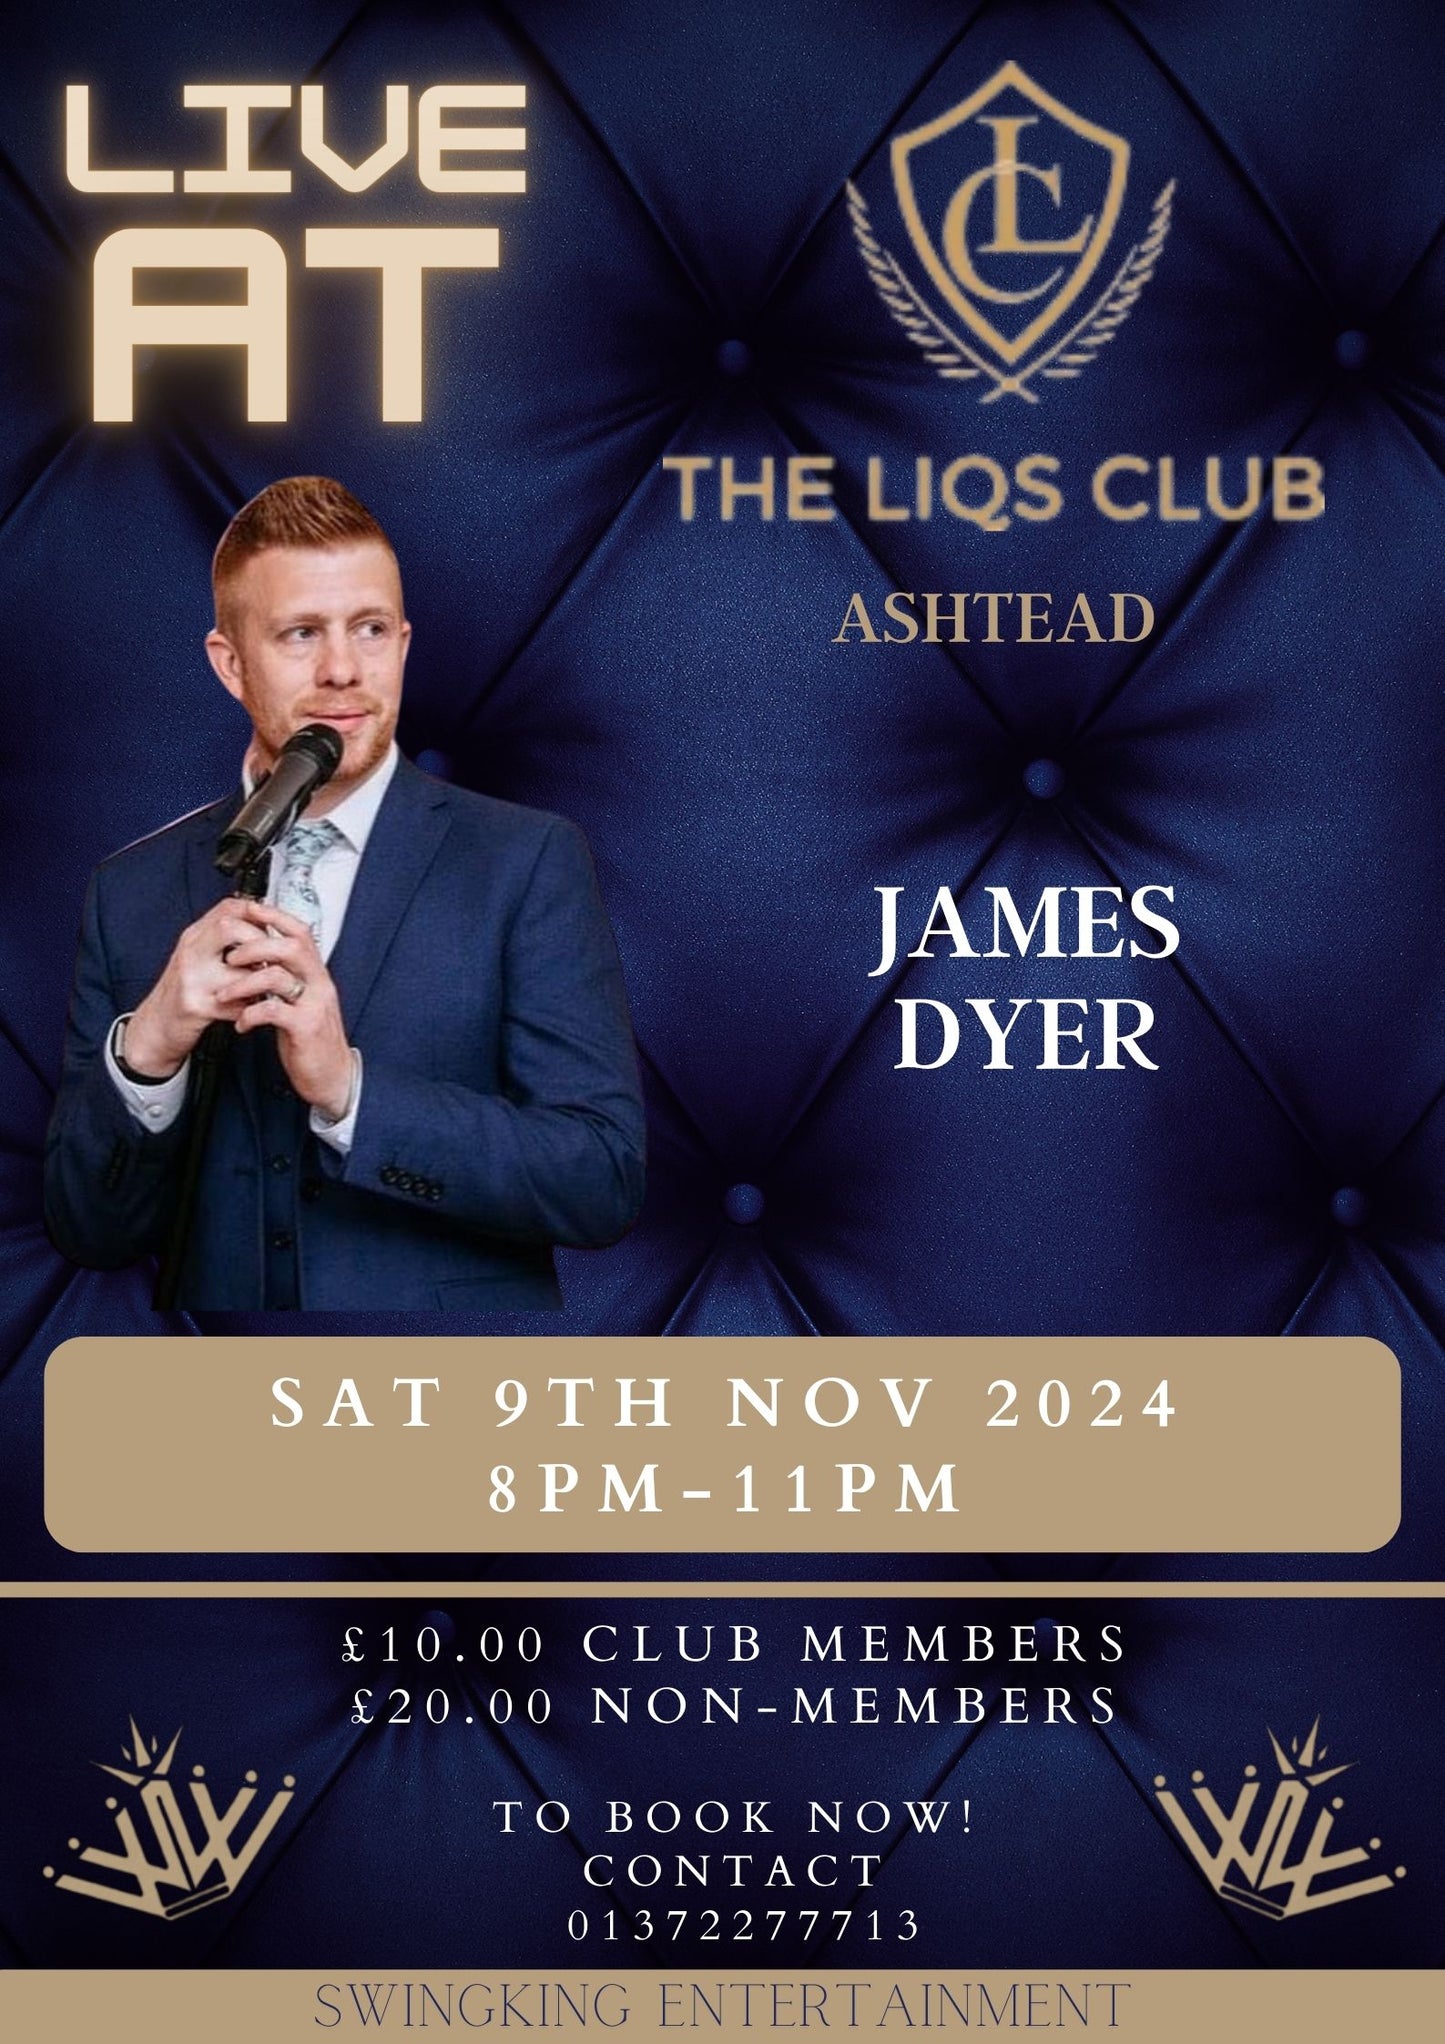 Live Music with James Dyer - Saturday 9th November